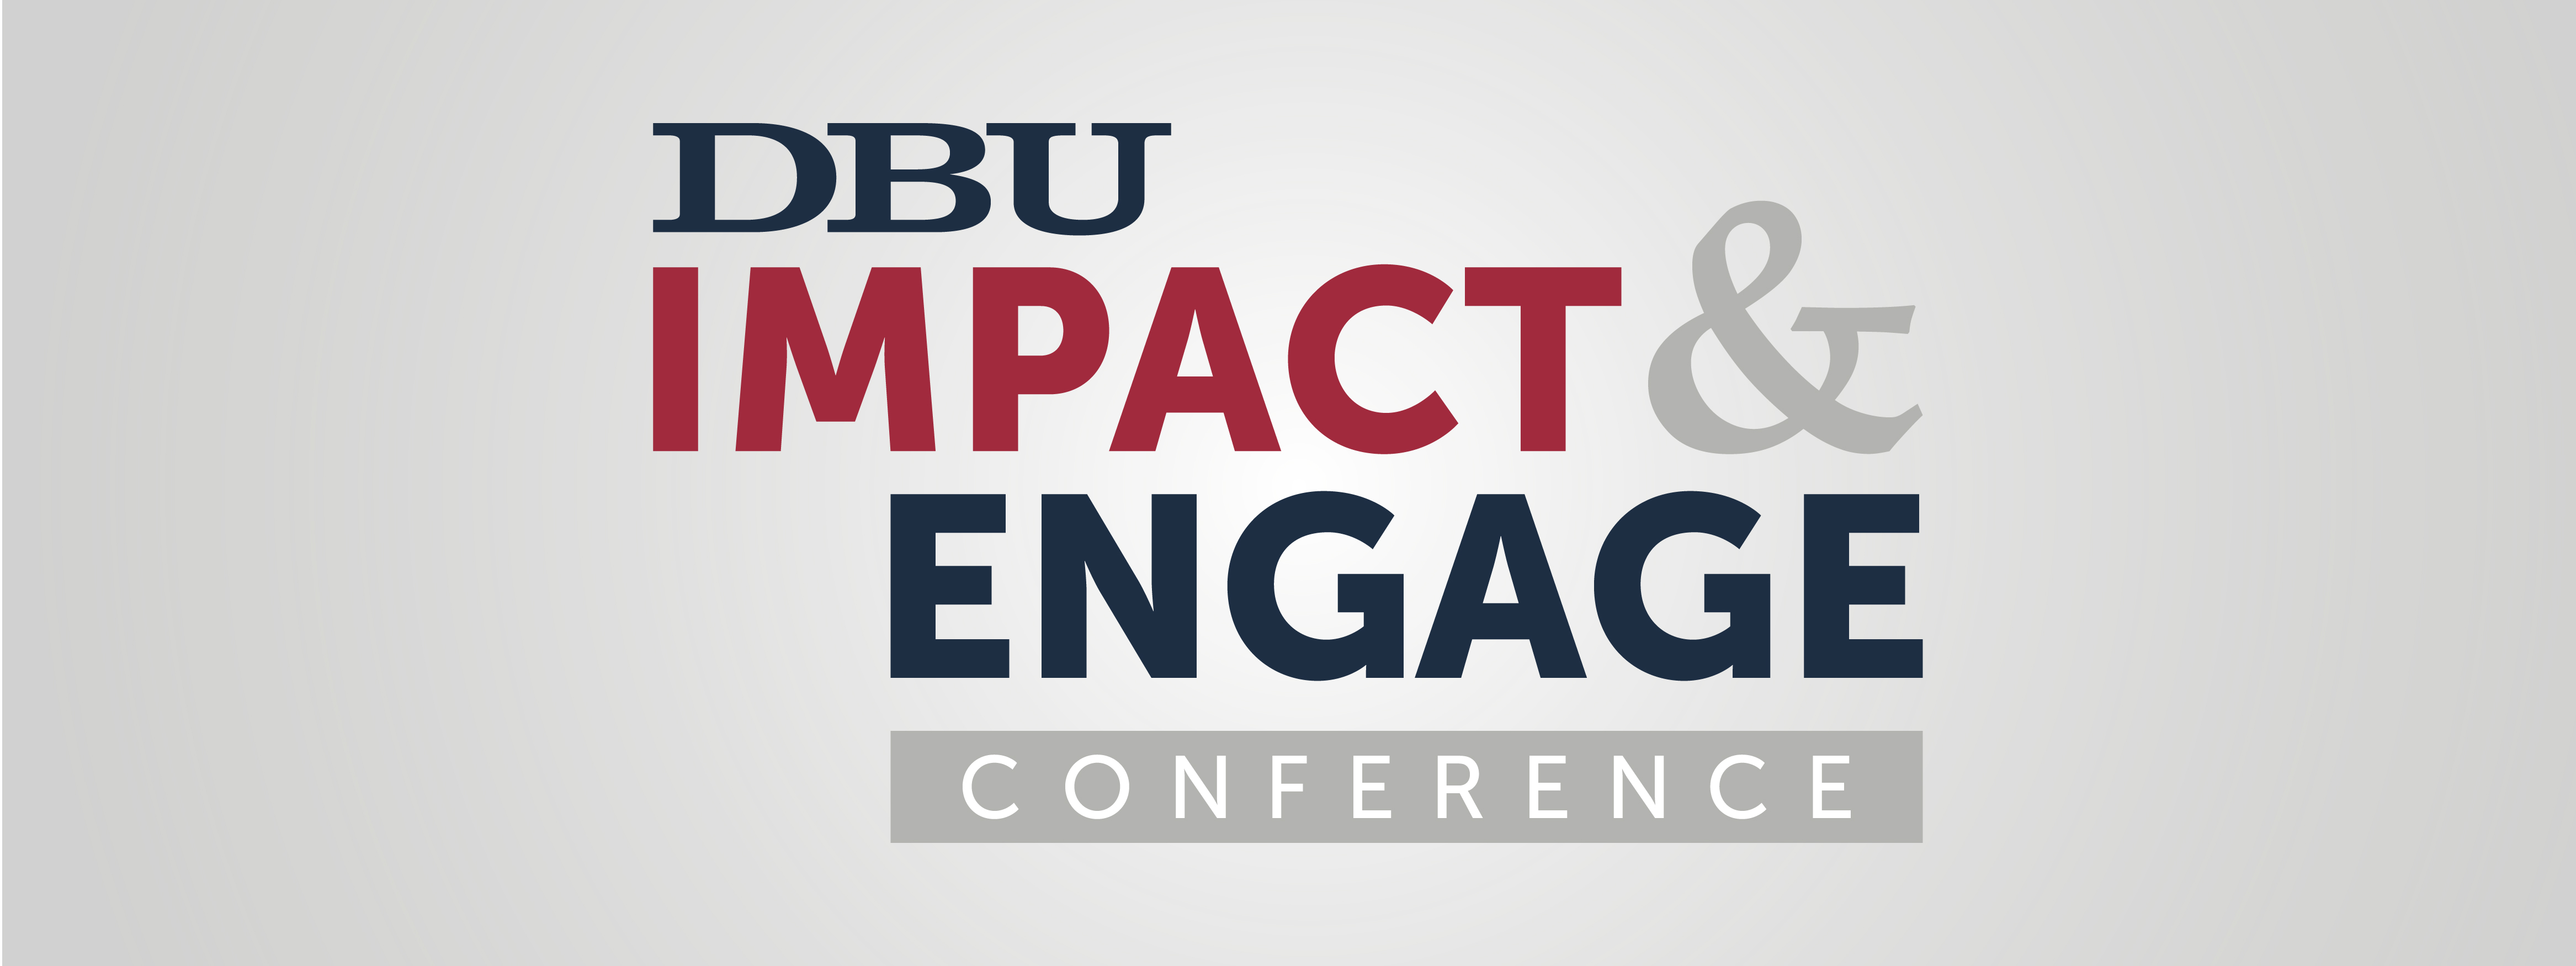 Impact & Engage Conference